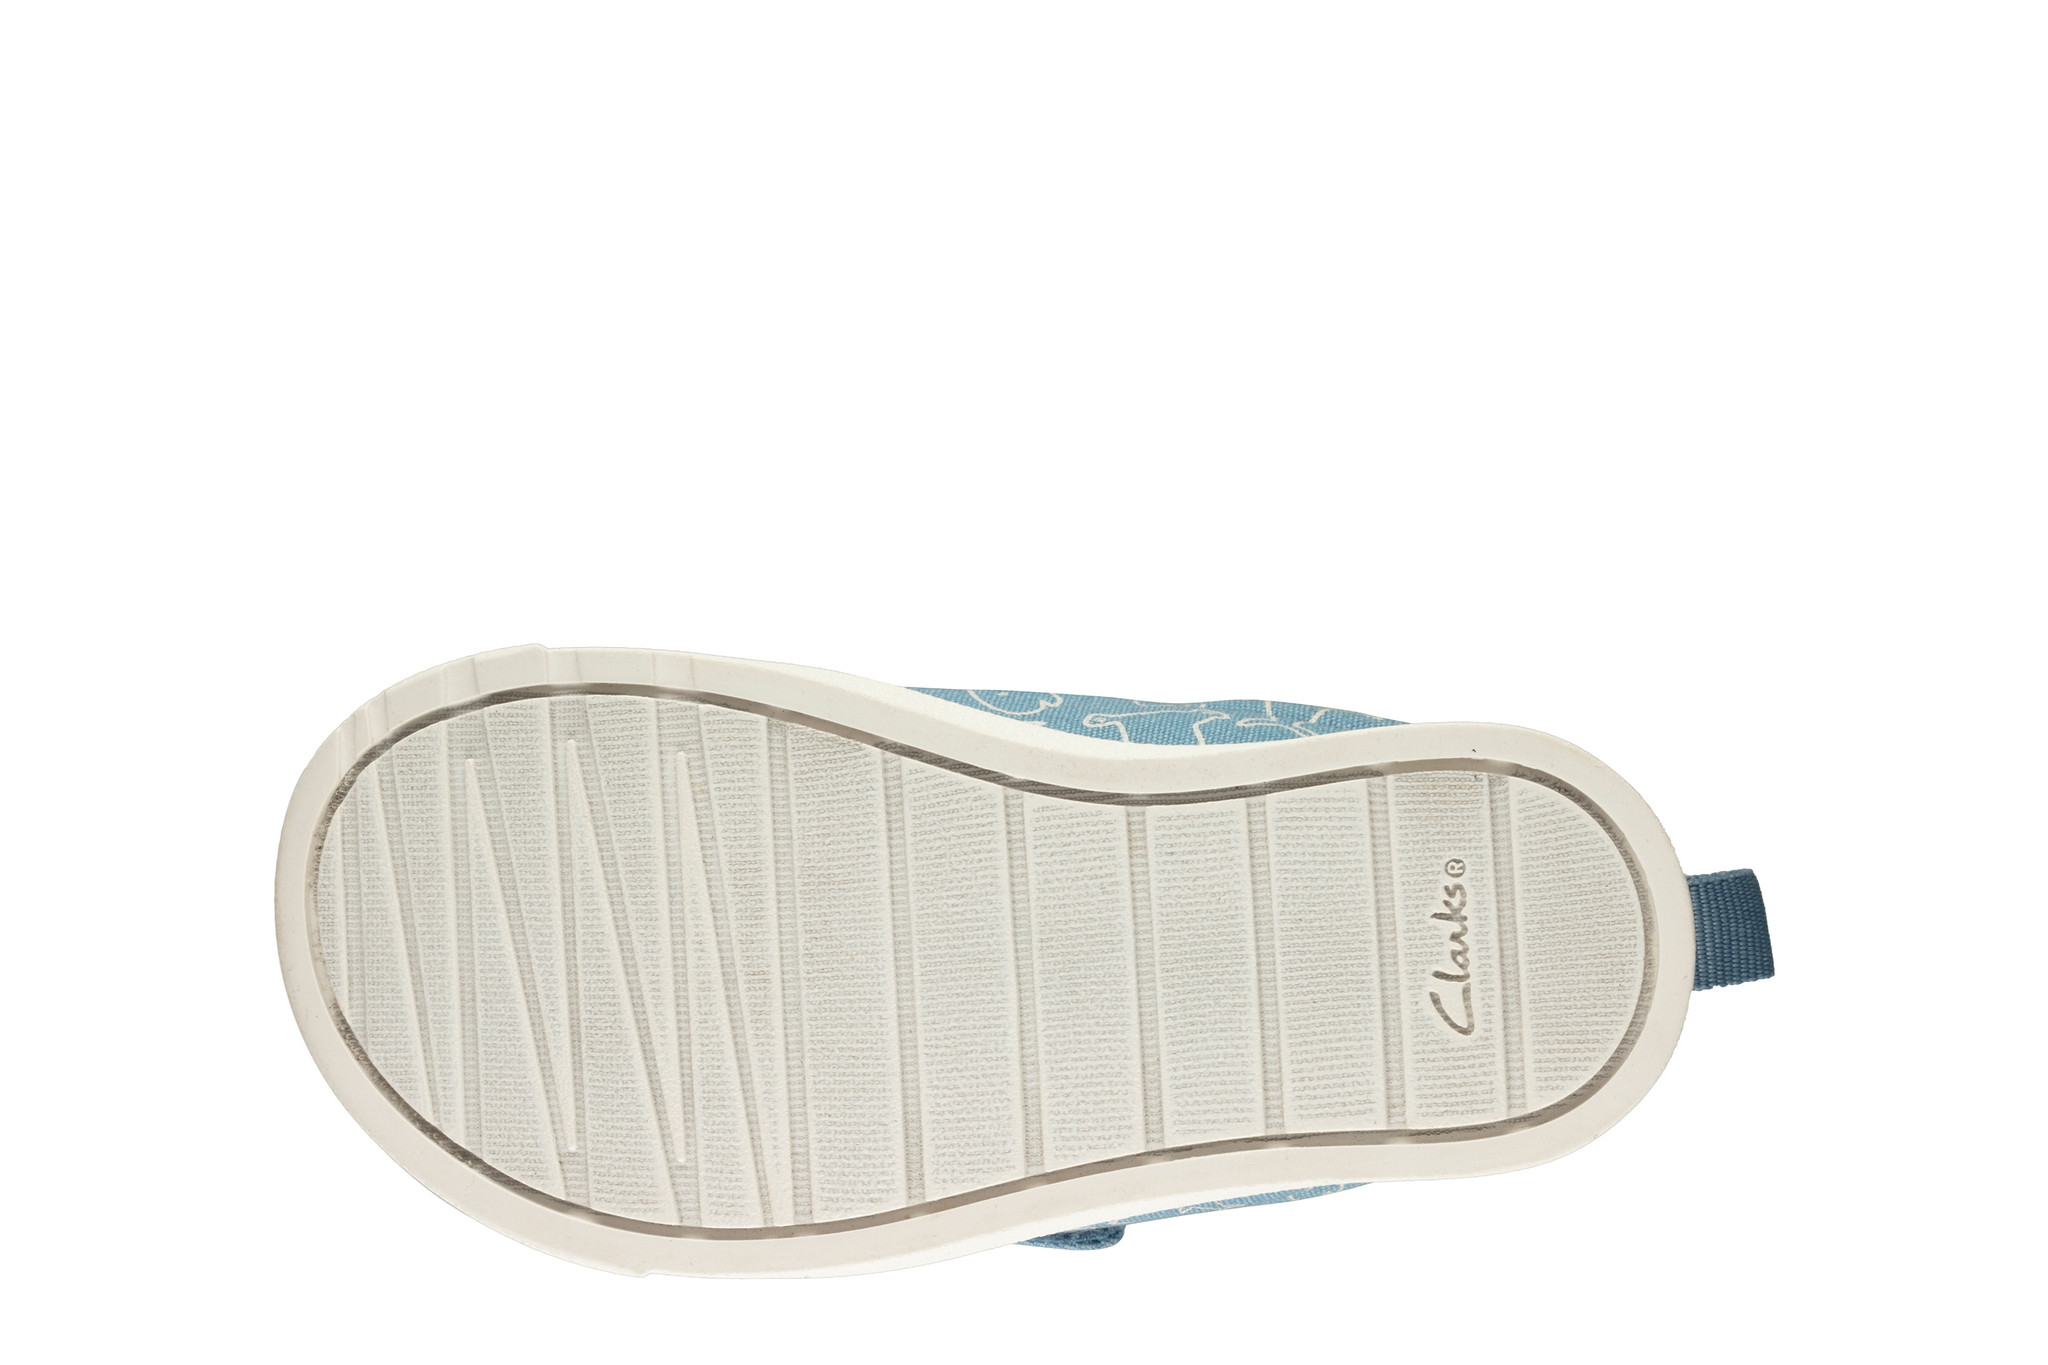 Clarks City Bright Mid Blue Infant